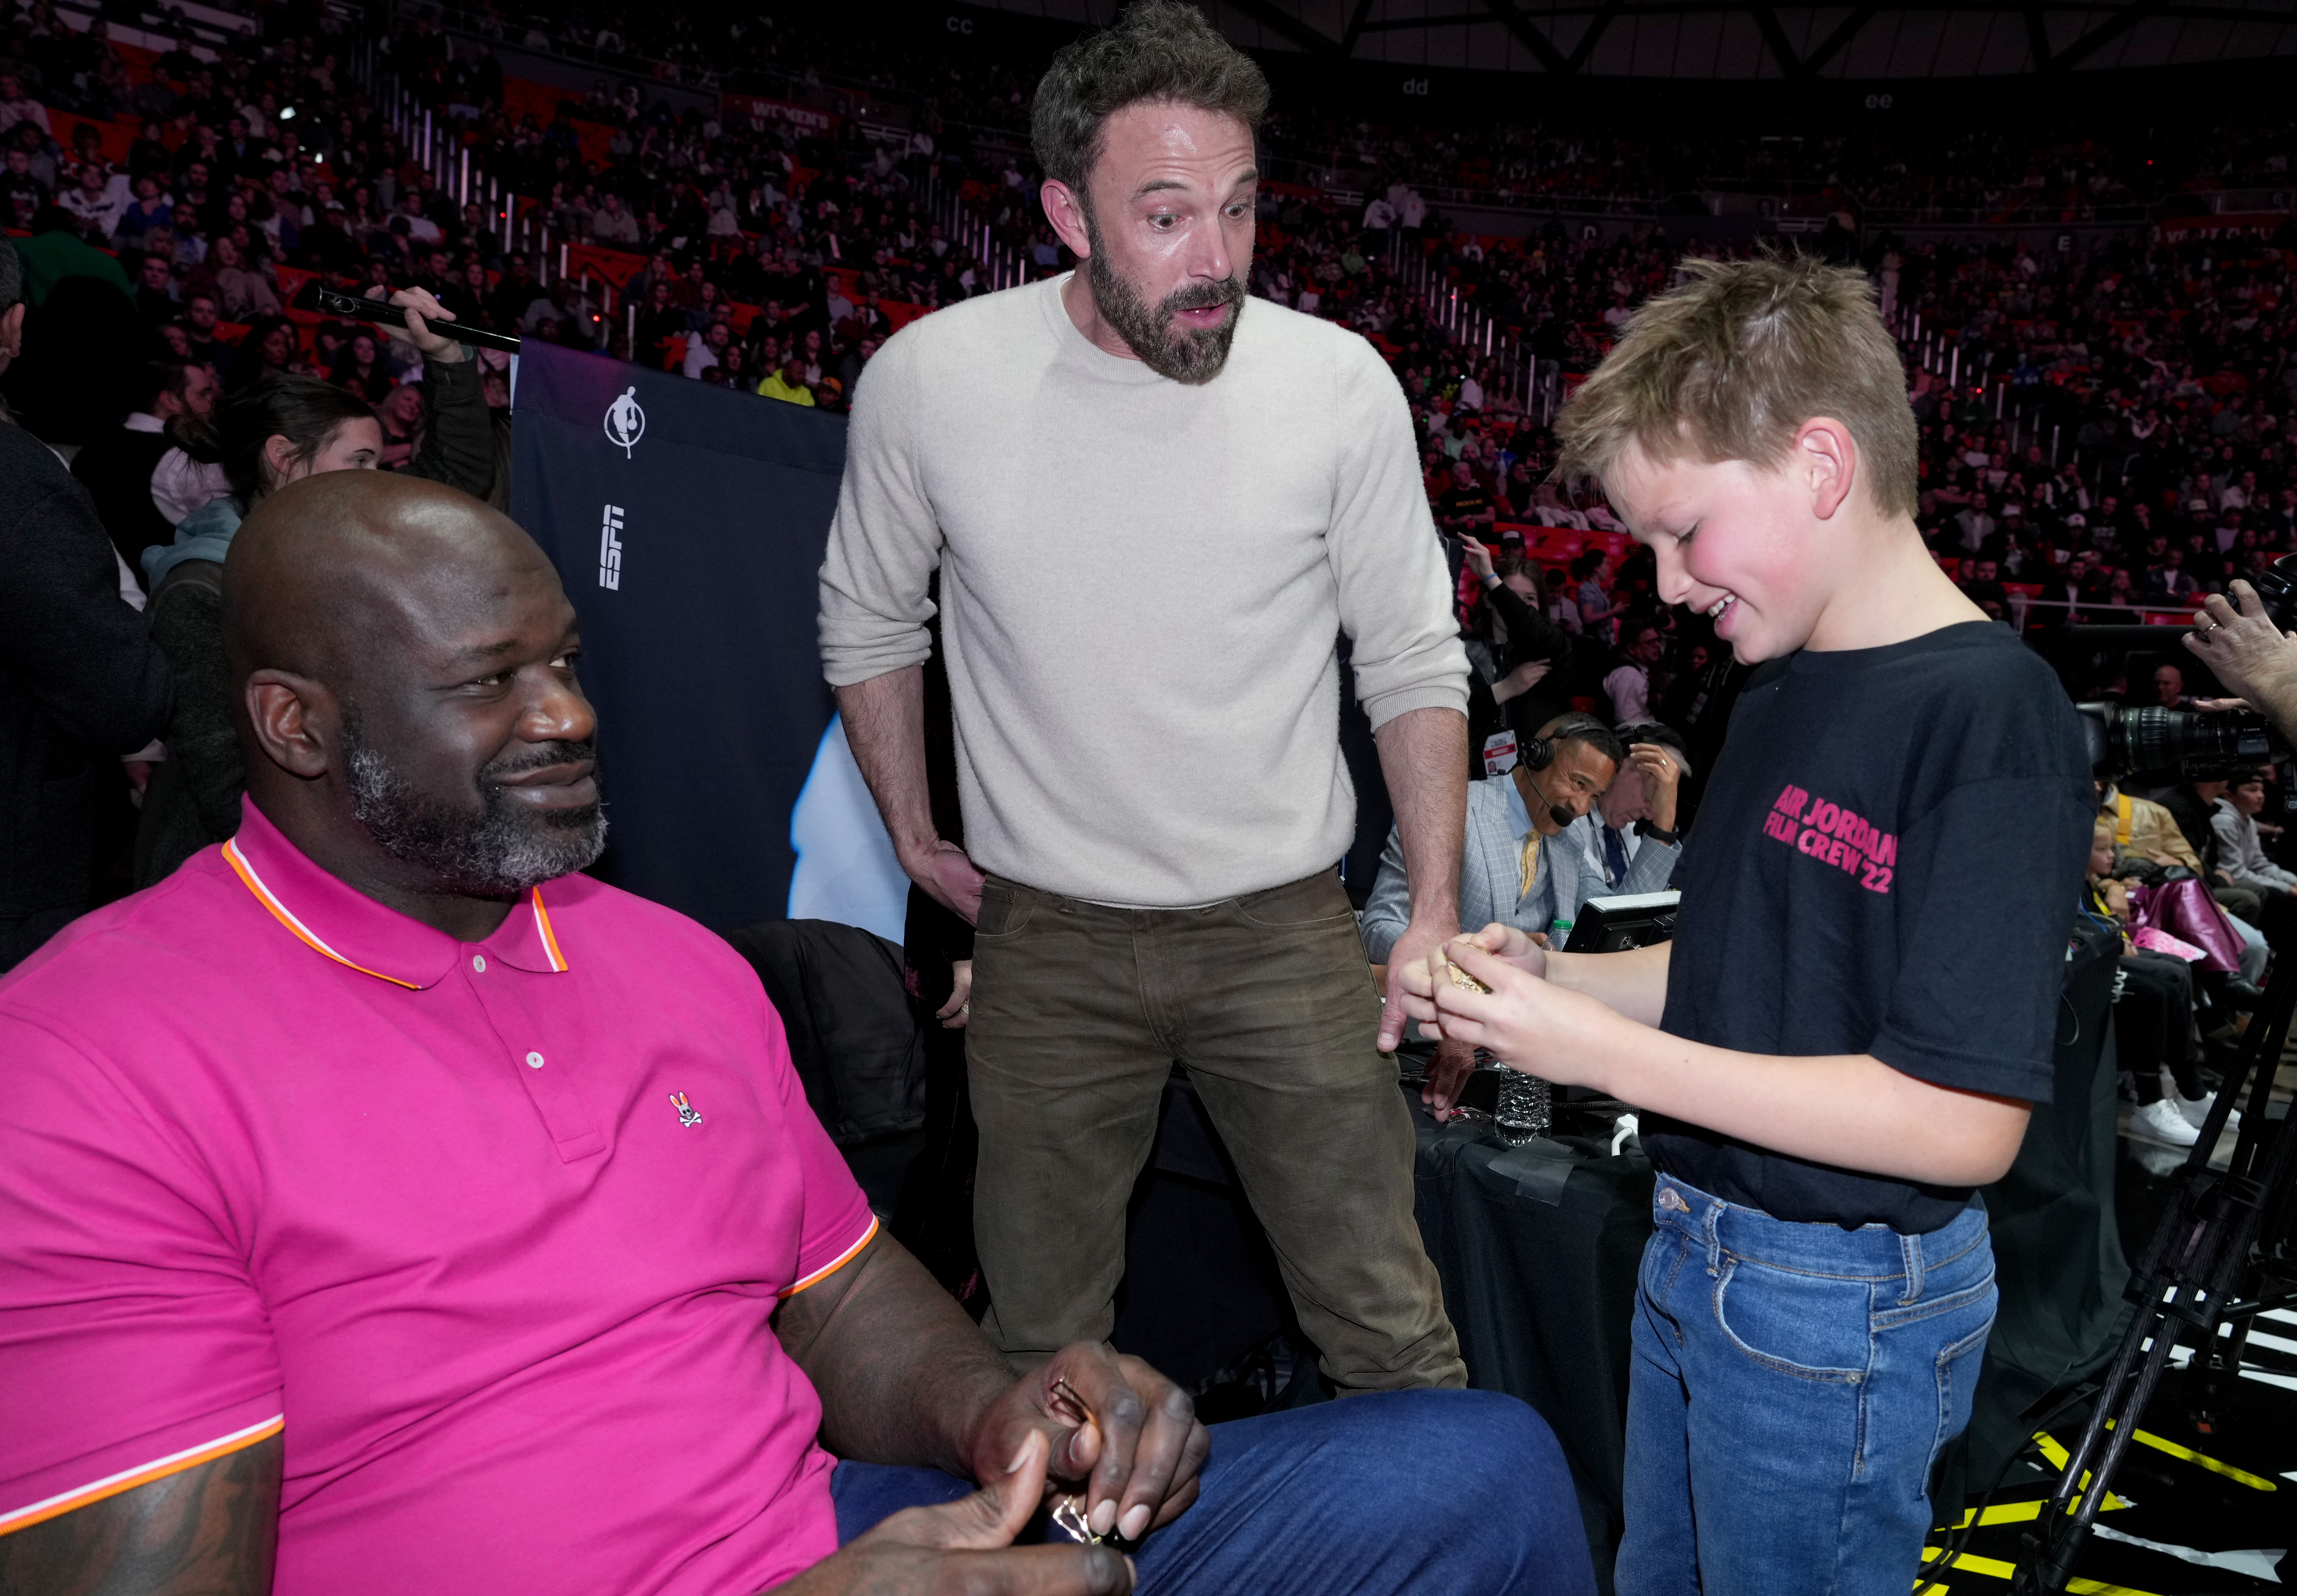 Shaquille O'Neal, Ben Affleck, and Samuel Garner Affleck attend the Ruffles Celebrity Game during the 2023 NBA All-Star Weekend at Vivint Arena on February 17, 2023 in Salt Lake City, Utah. | Source: Getty Images